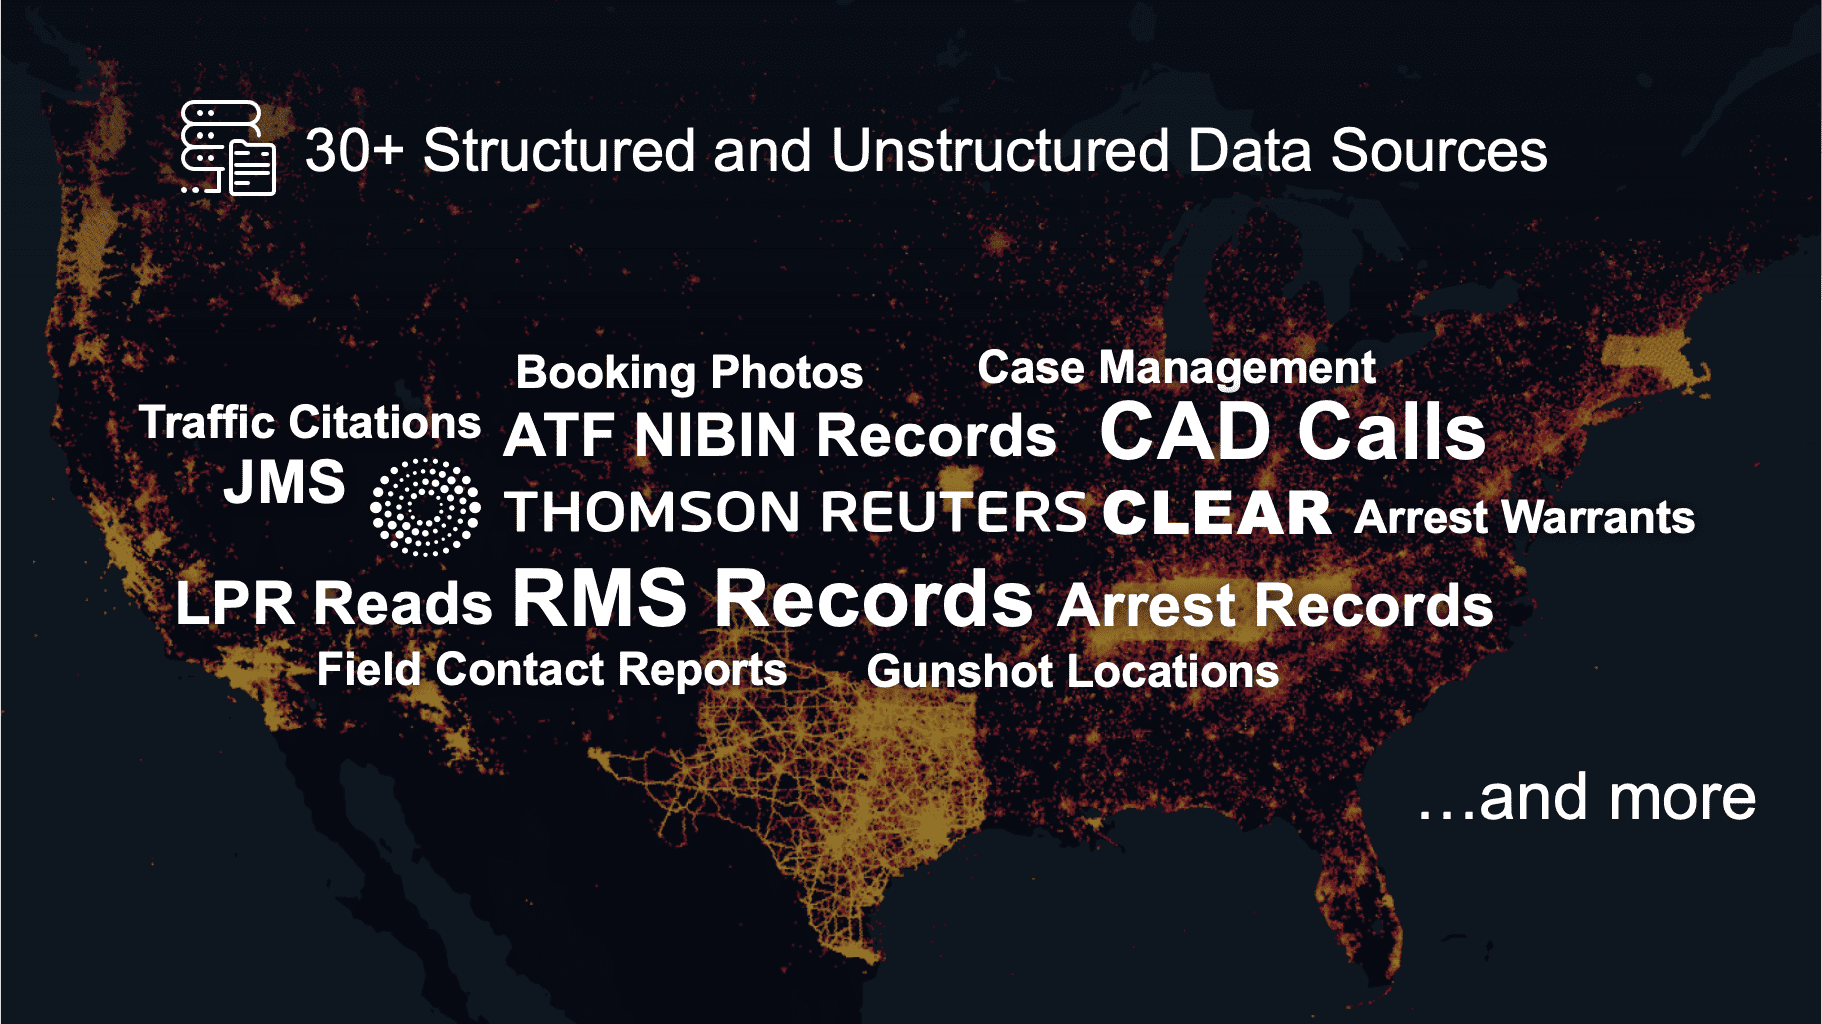 <strong>2. Access</strong> more than one billion law enforcement data records from a centralized interface.